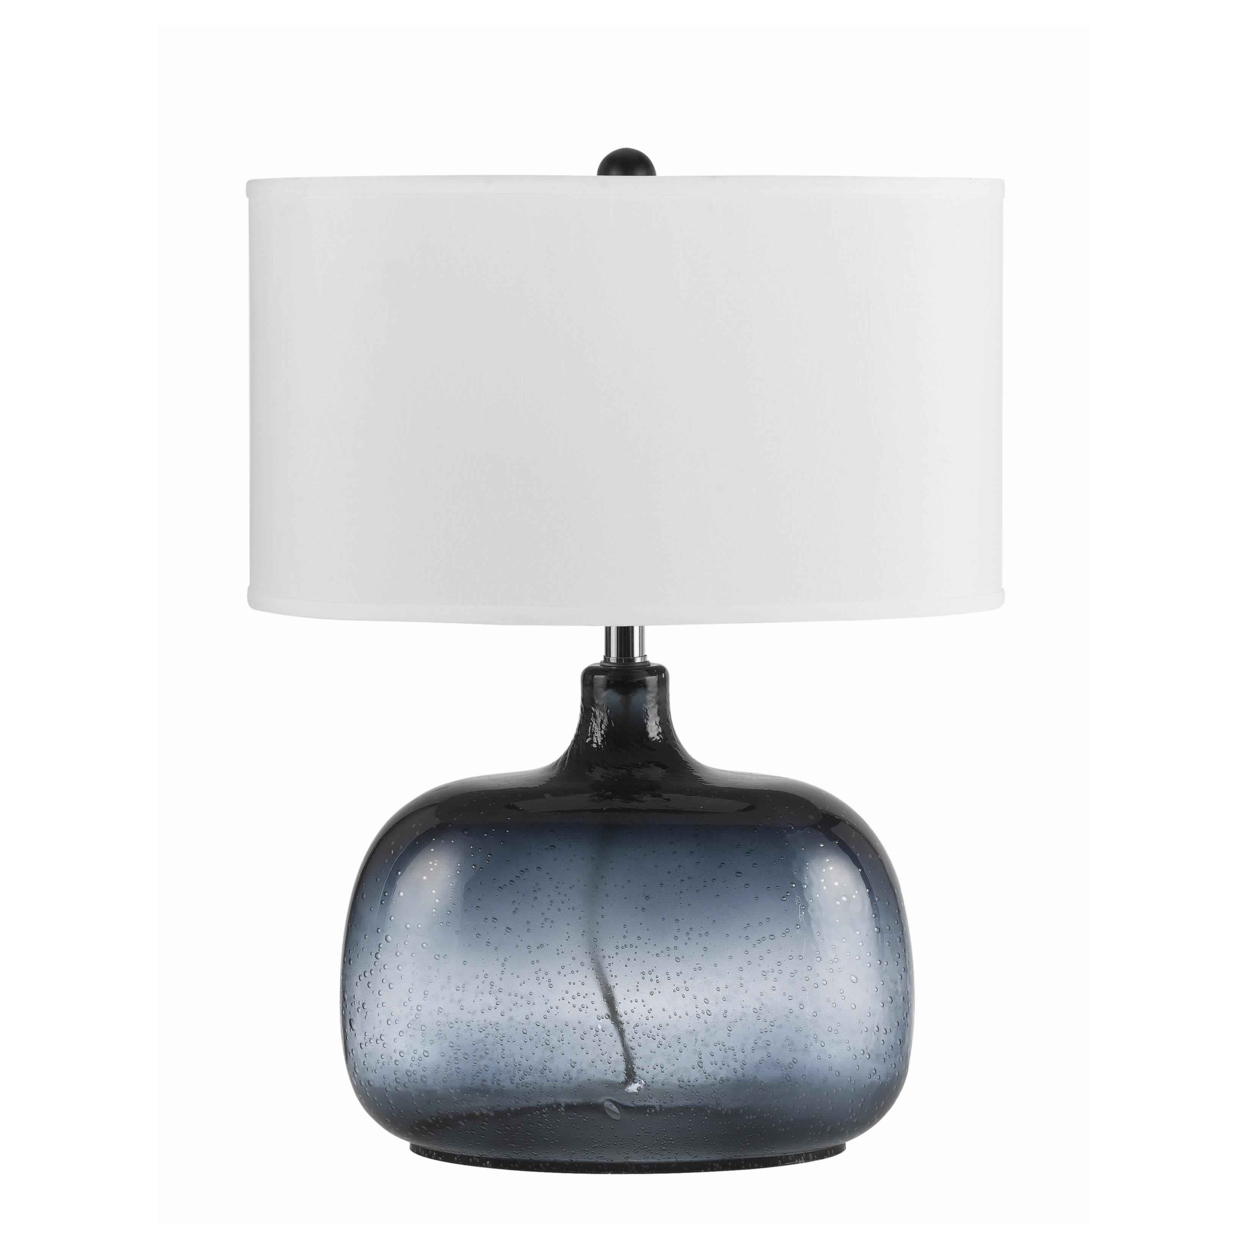 Glass Body Table Lamp With Drum Shade And Bubble Design, Blue And White- Saltoro Sherpi